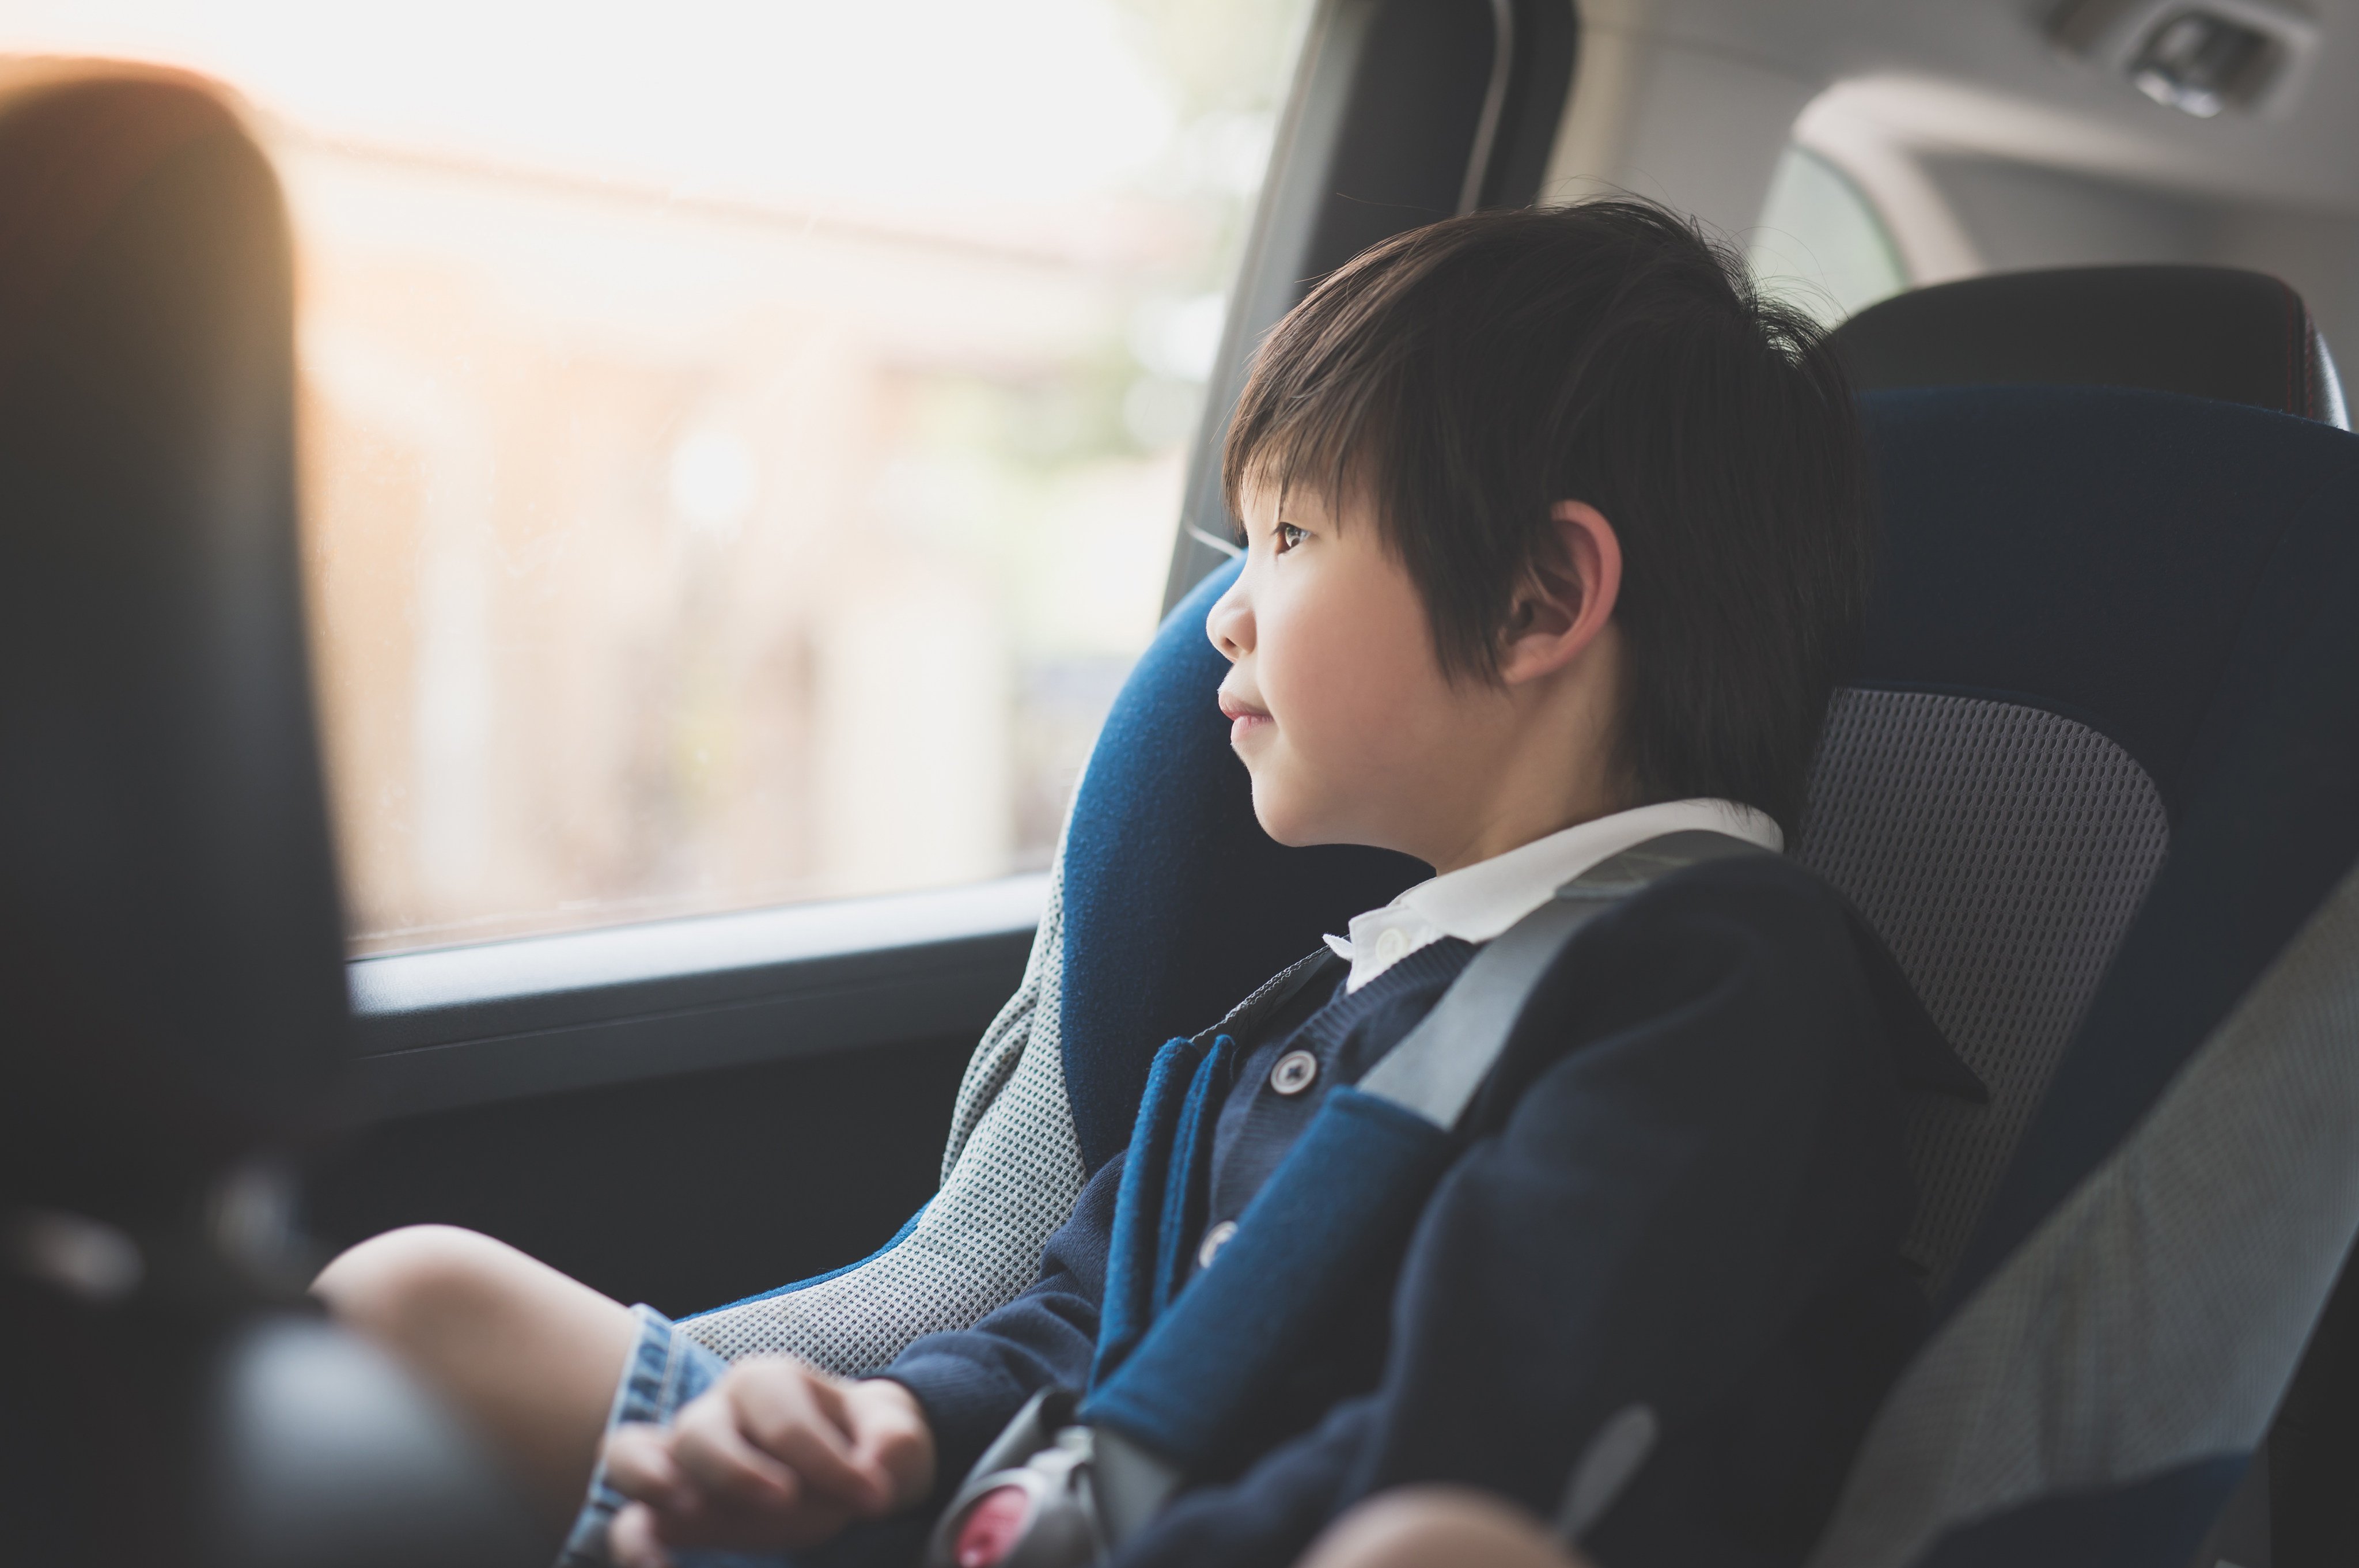 Authorities have proposed requiring the use of a child restraint device in private cars for children aged seven or below. Photo: Shutterstock Images